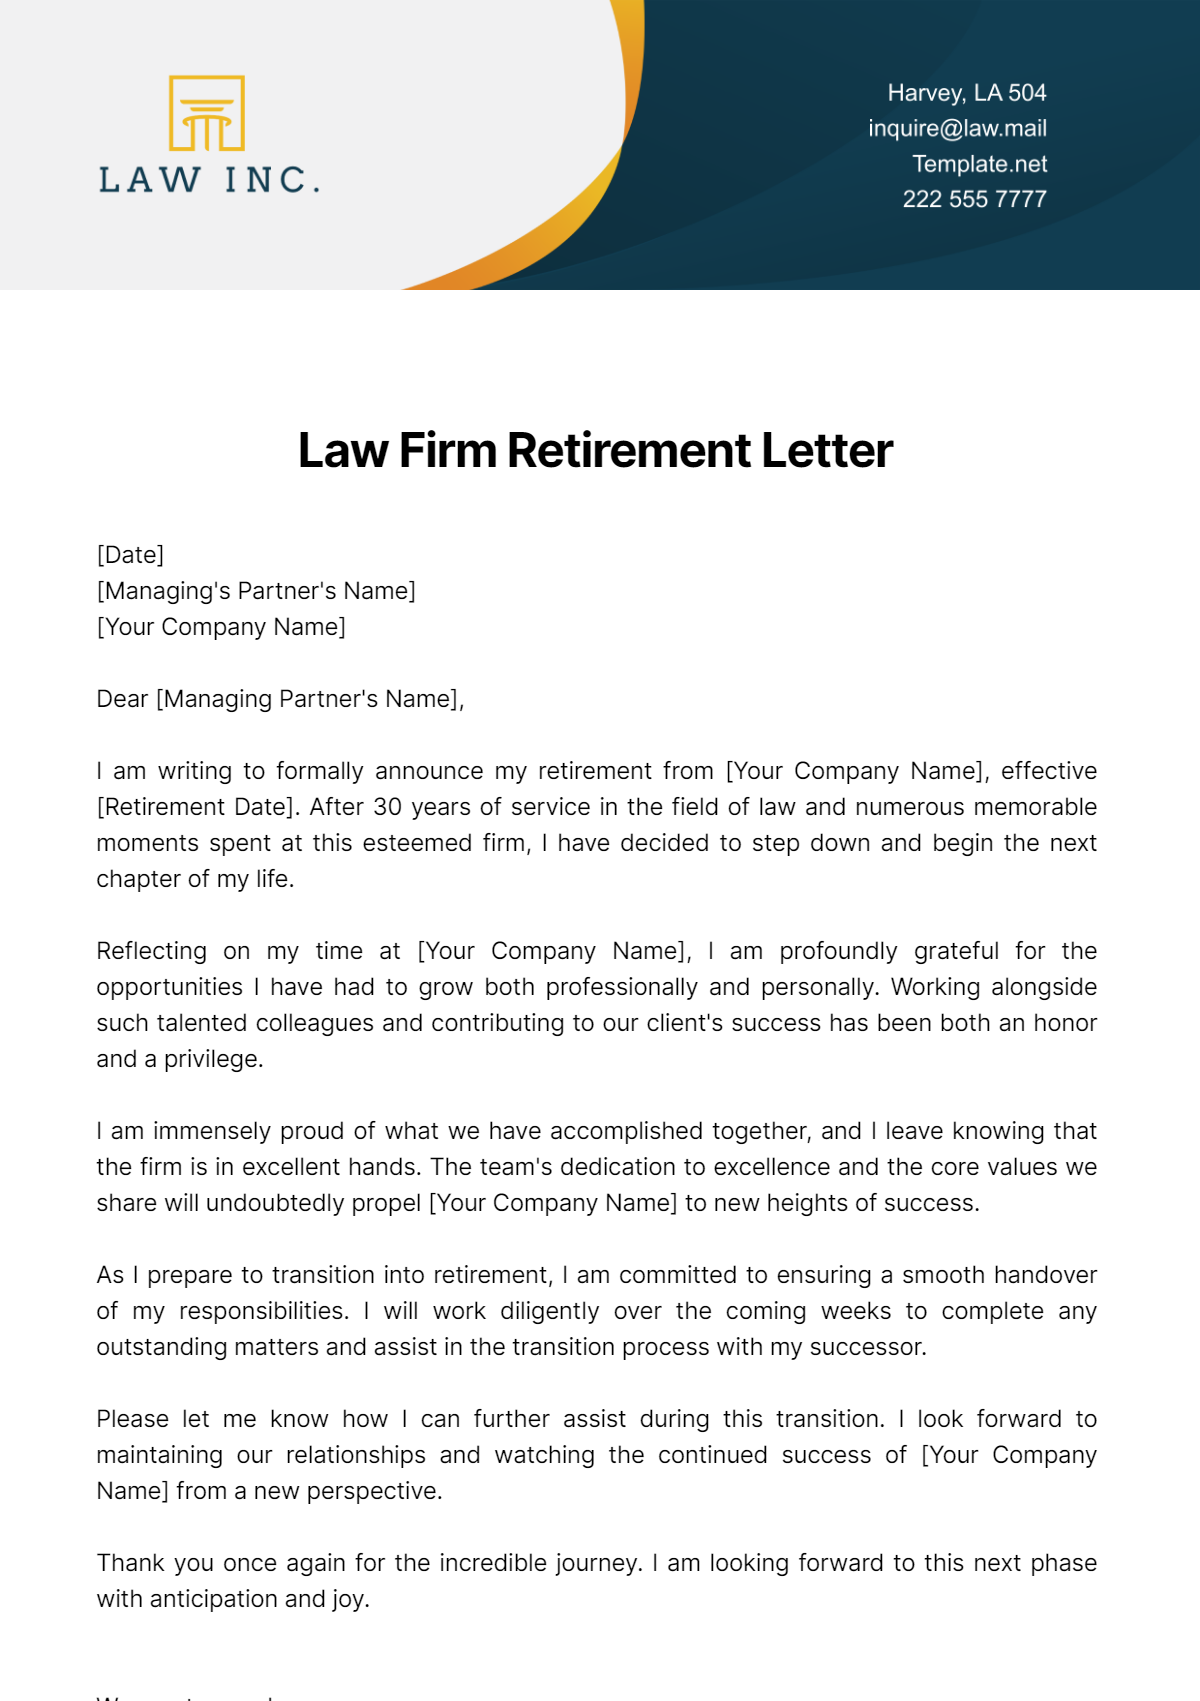 Law Firm Retirement Letter Template